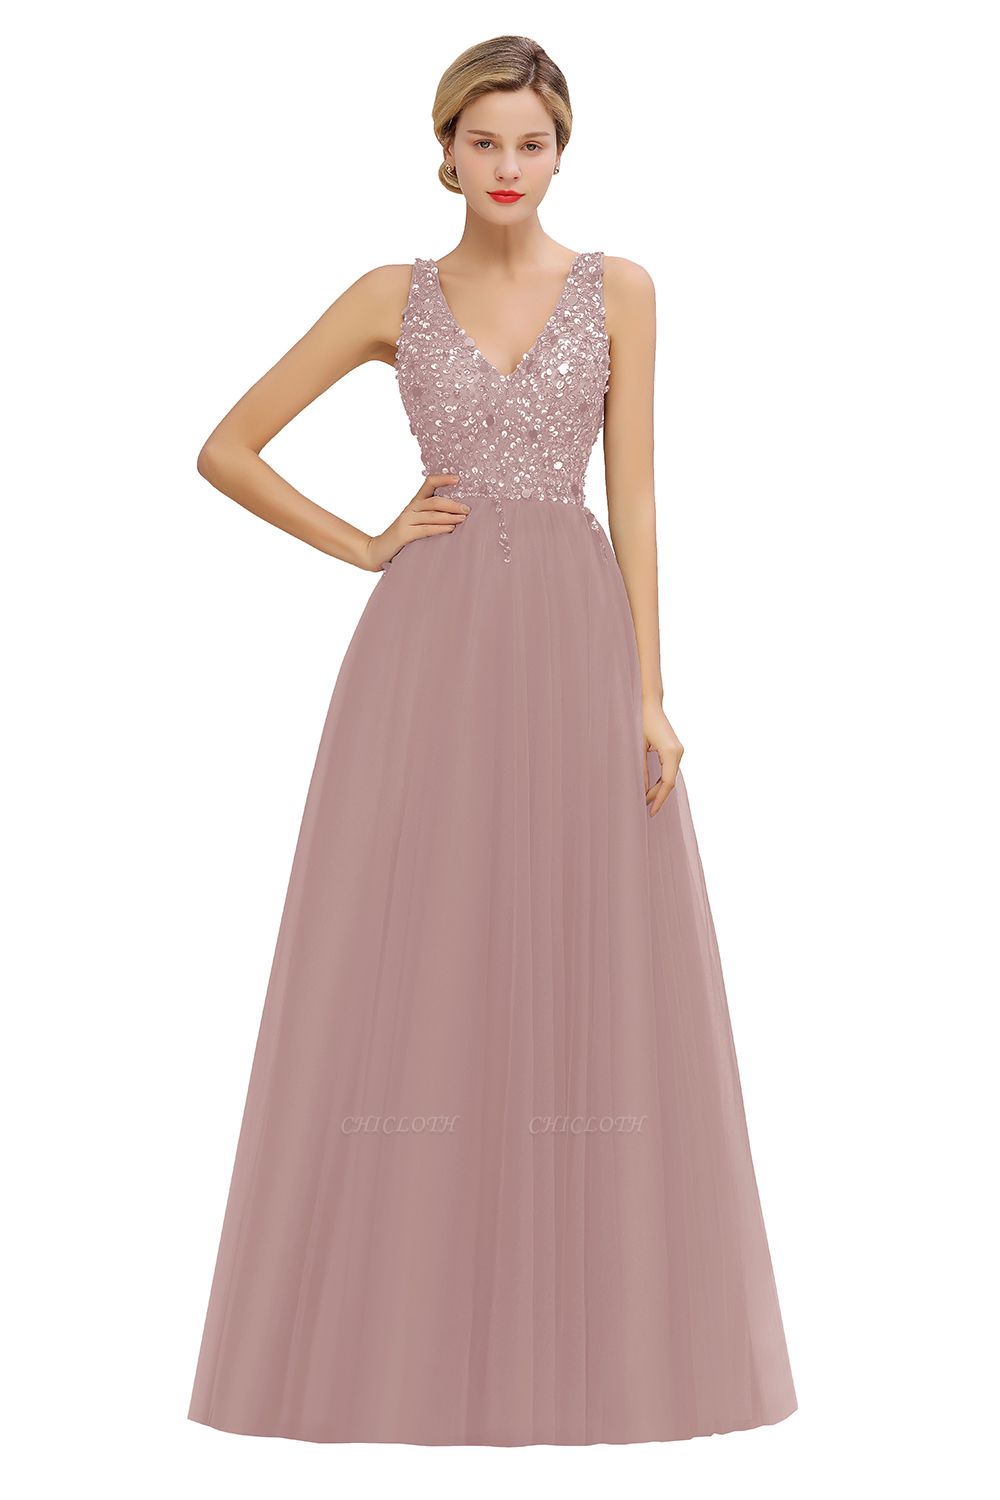 Chicloth Fabulous V-neck Tulle A-line Prom Dress